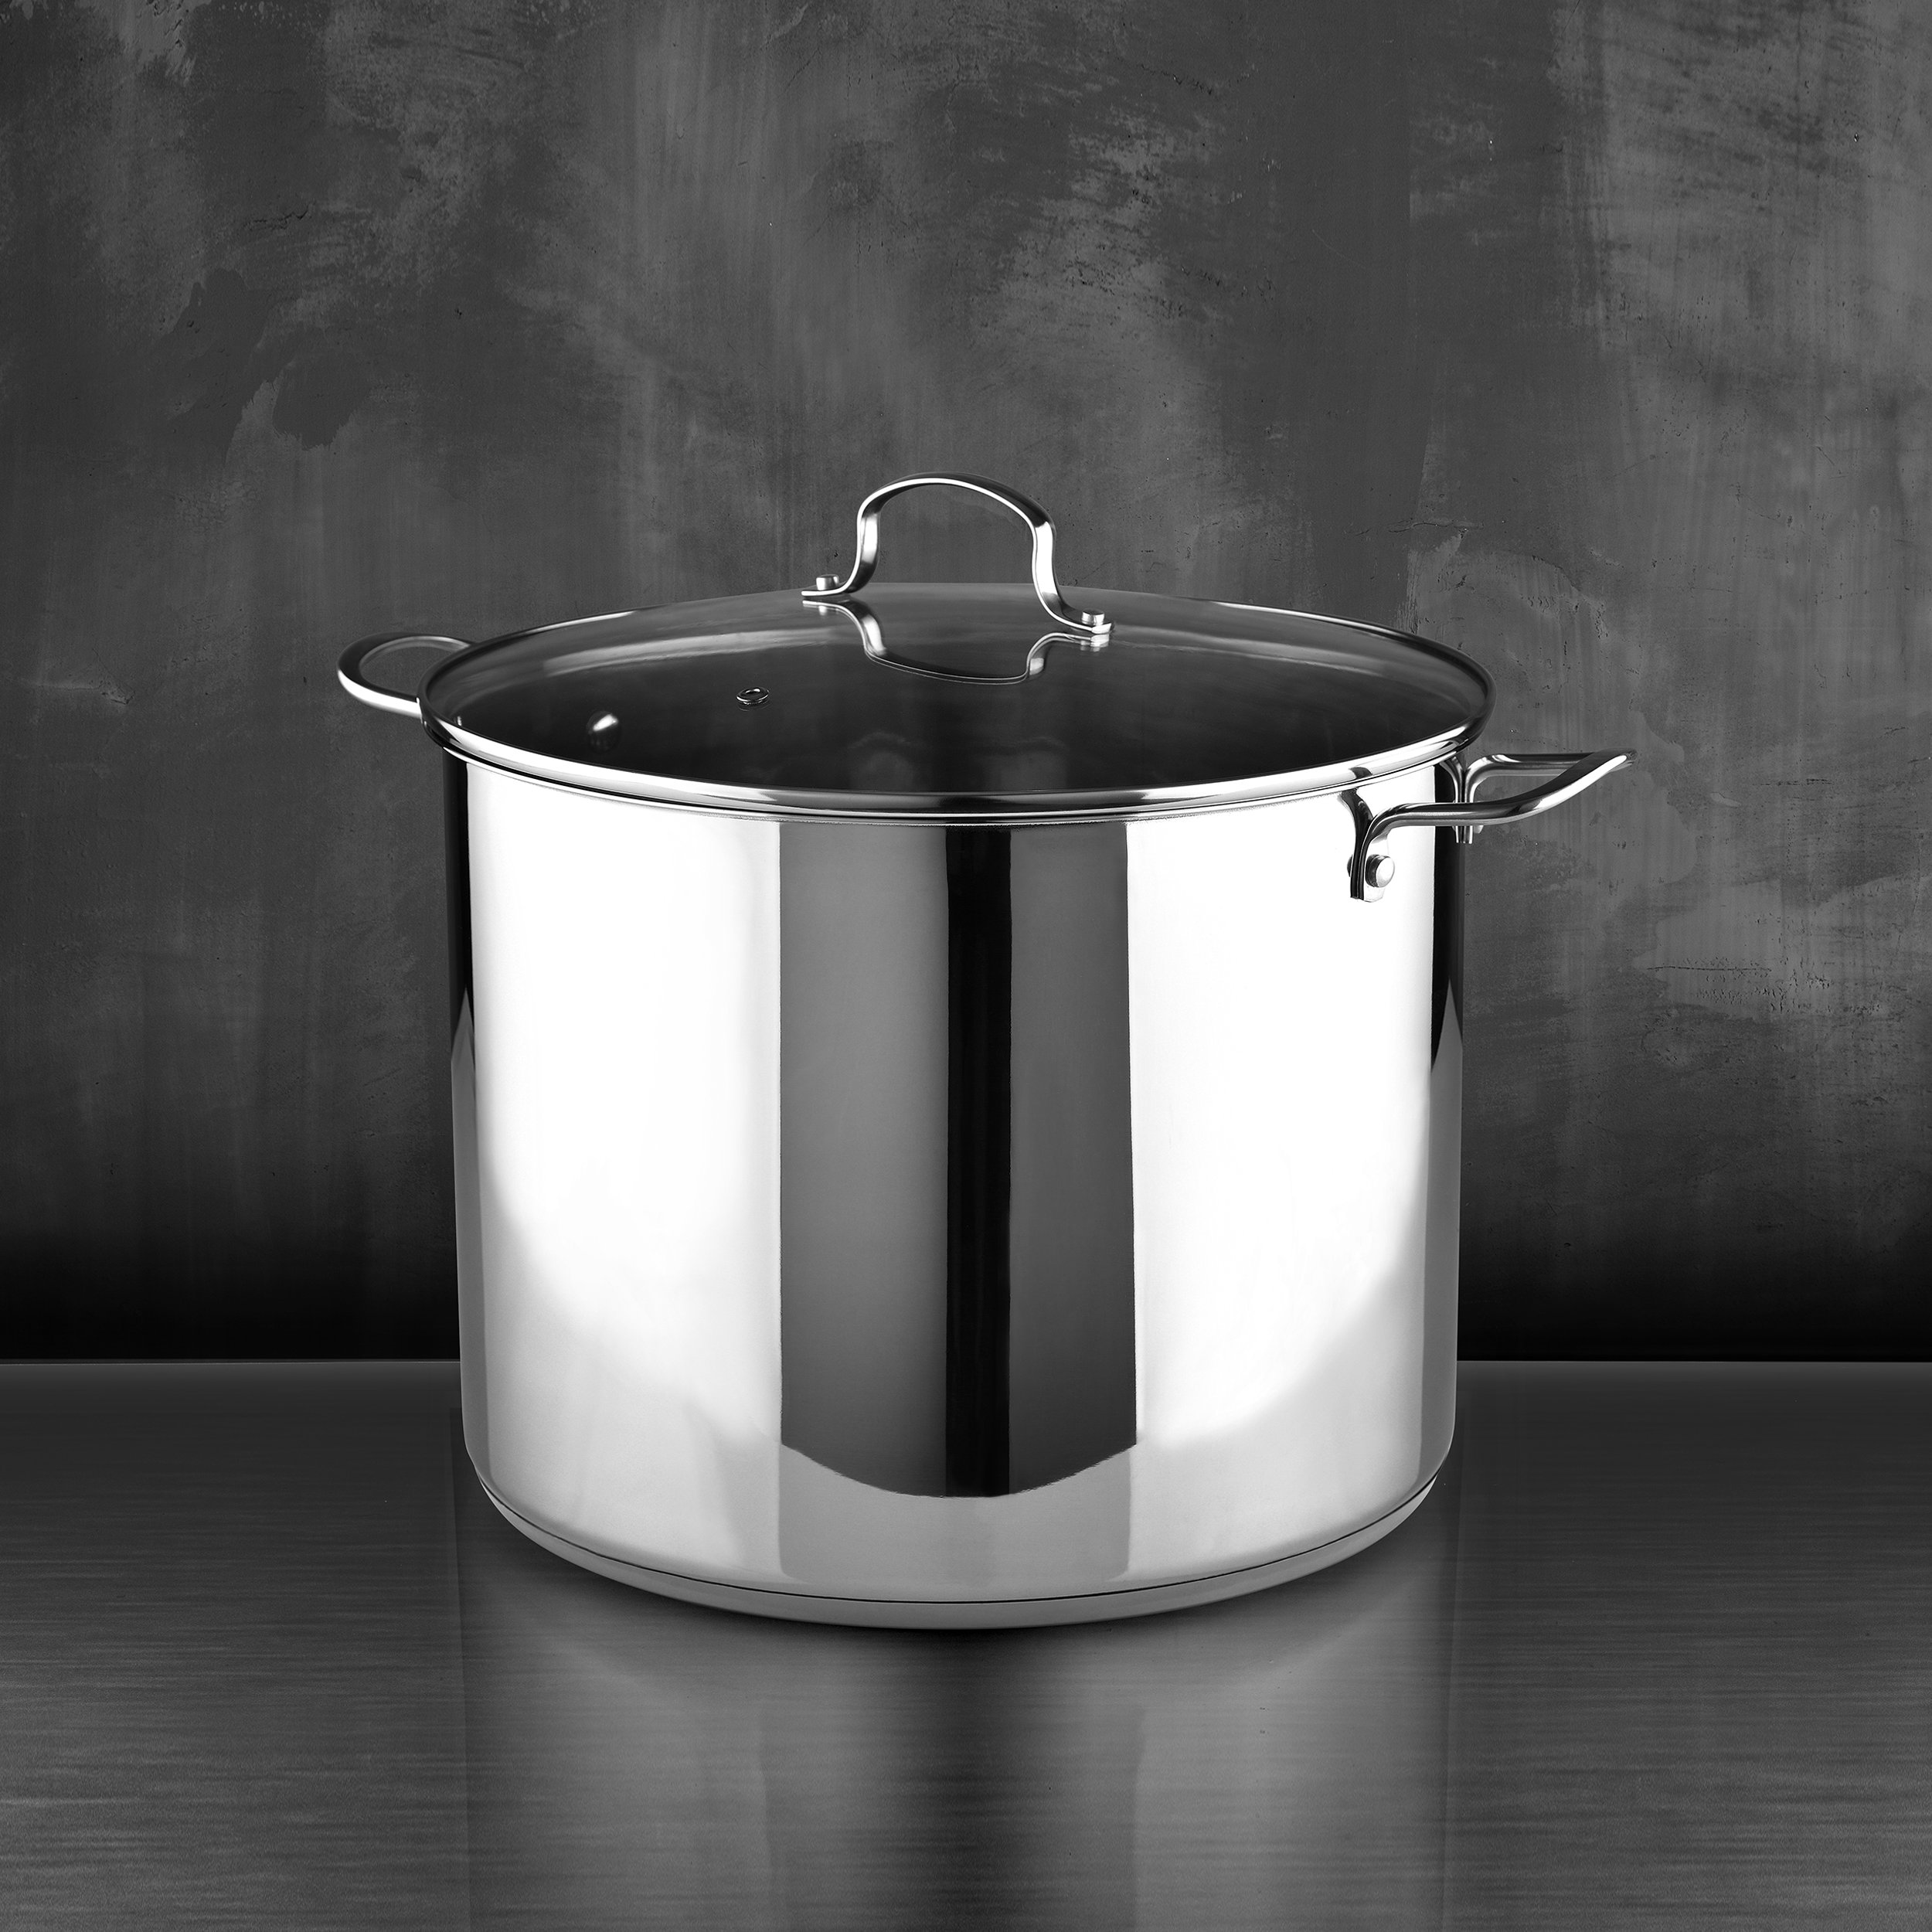 Bergner Tri Ply by Bergner - 11 Pc Tri Ply Clad Pots and Pans